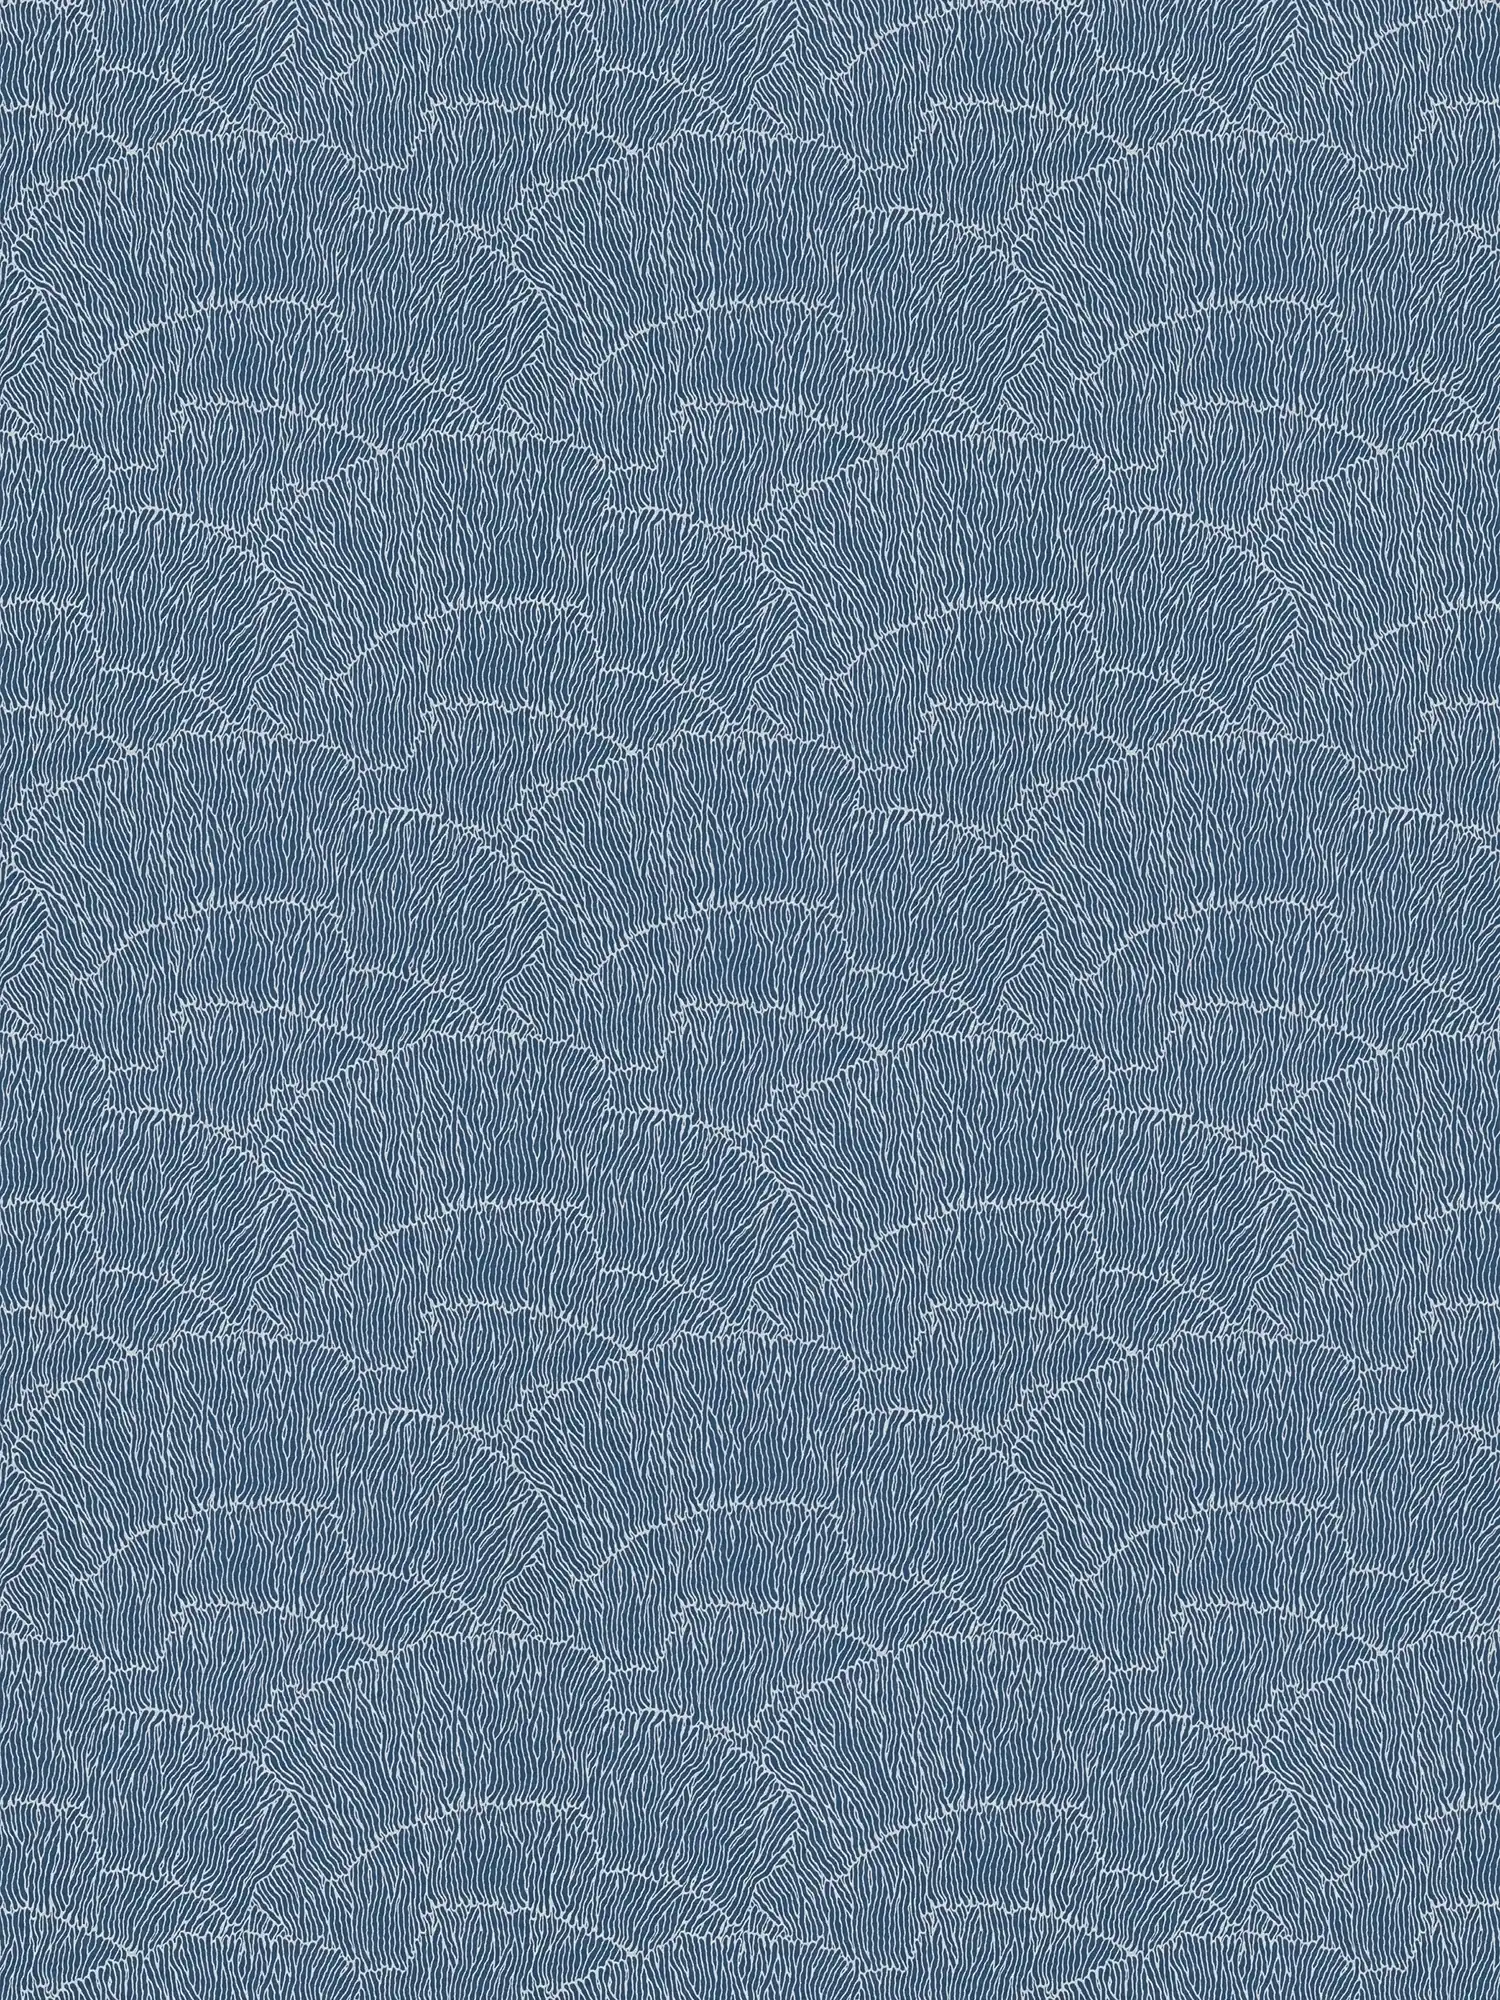 Non-woven wallpaper with line pattern - silver, blue, metallic
